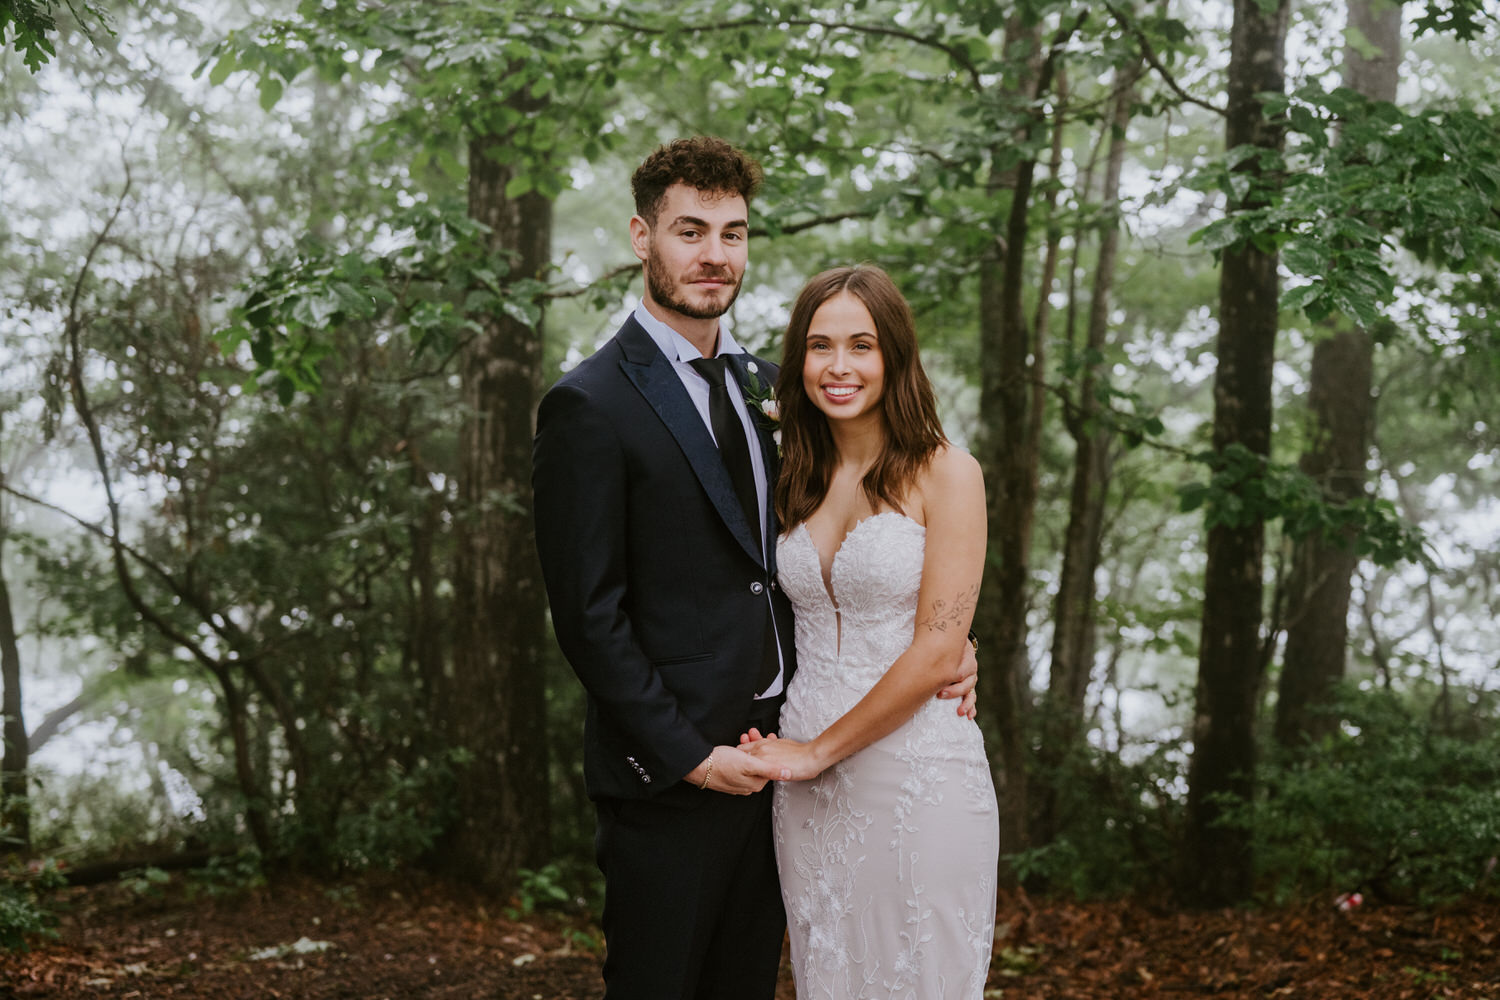 A couple poses in the forest in rainy day wedding photos.